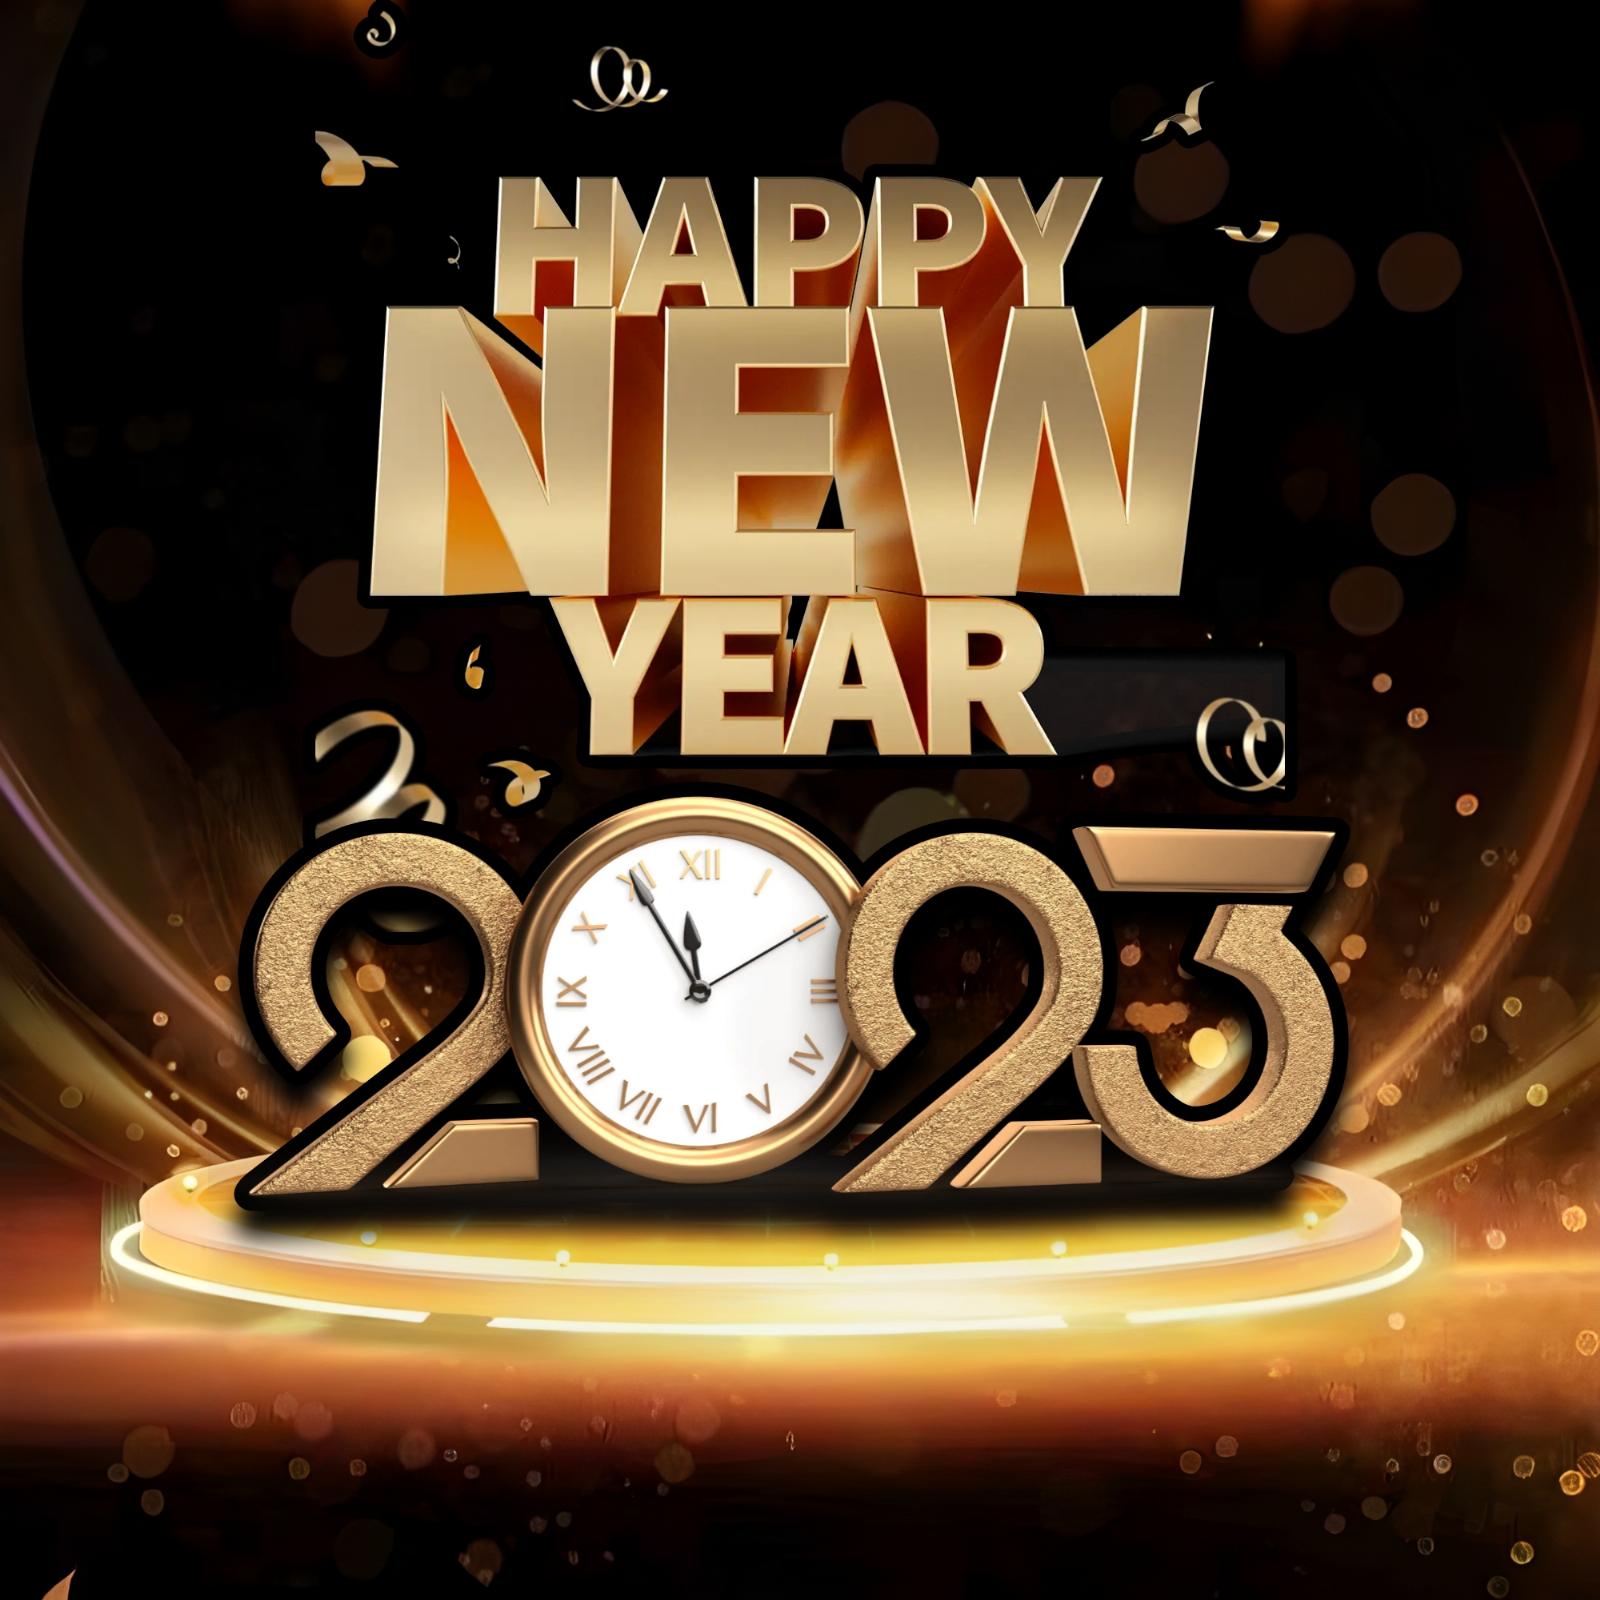 Happy New Year 2023 Images With Clock